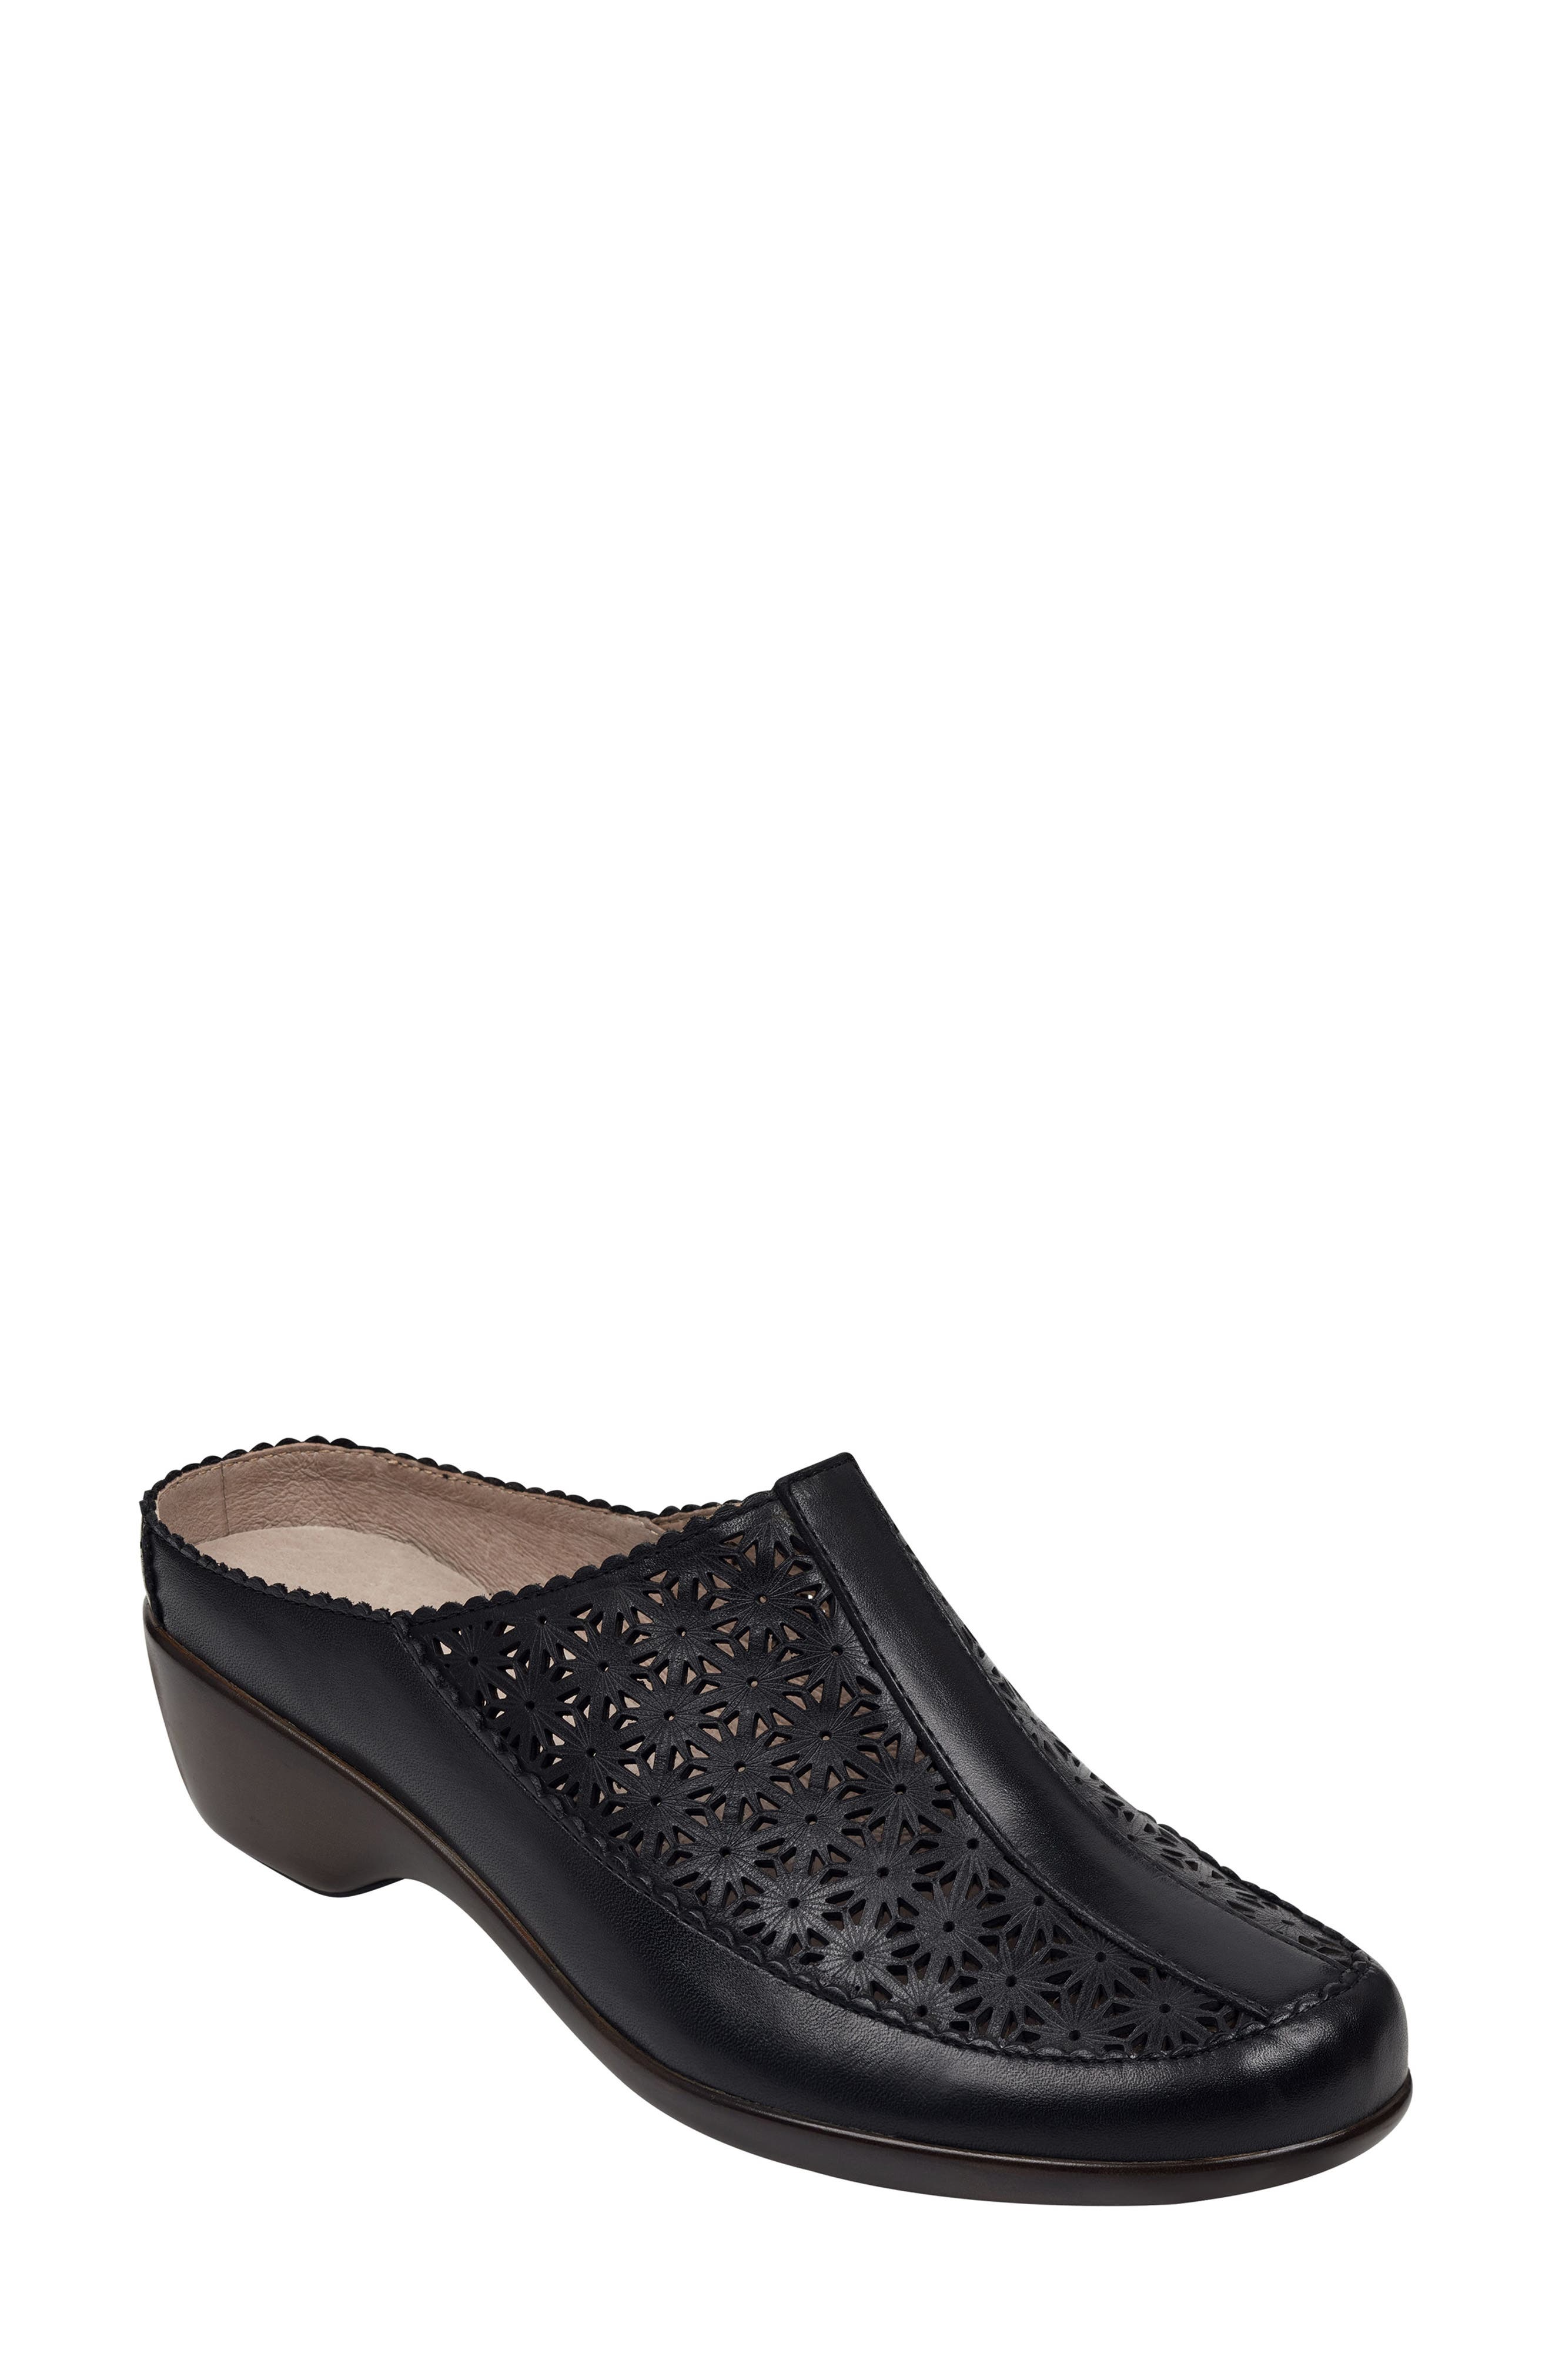 wide width mules shoes